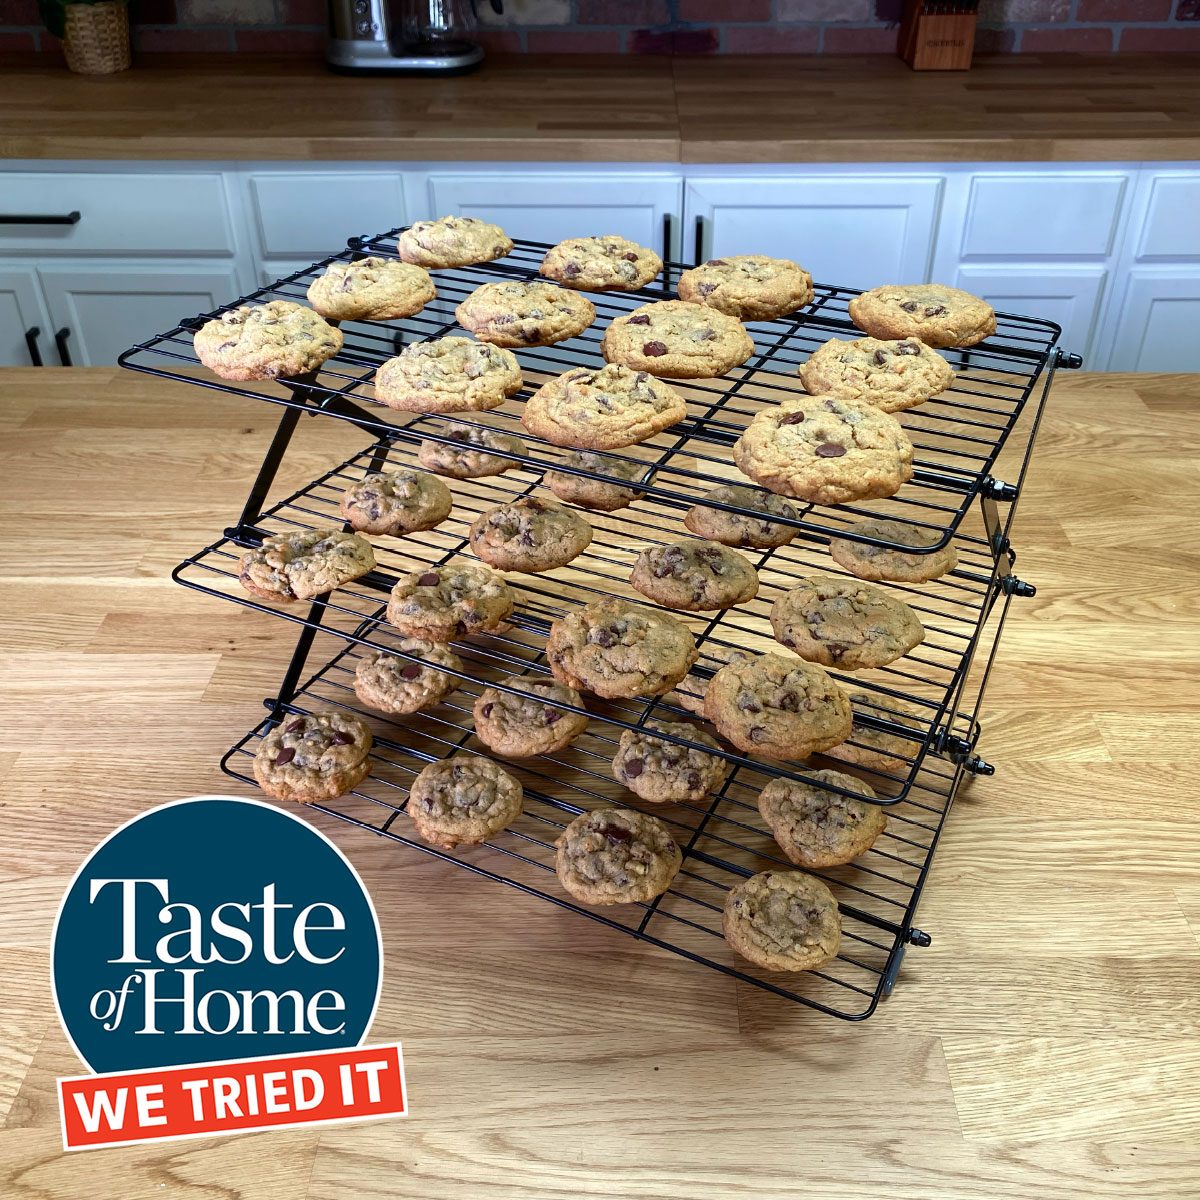 https://www.tasteofhome.com/wp-content/uploads/2023/06/This-Collapsible-Baking-Rack-Offers-Triple-the-Cookie-Cooling-Space_CoolingRack1_Madi-Koetting-Taste-of-Home_FT.jpg?fit=700%2C1024